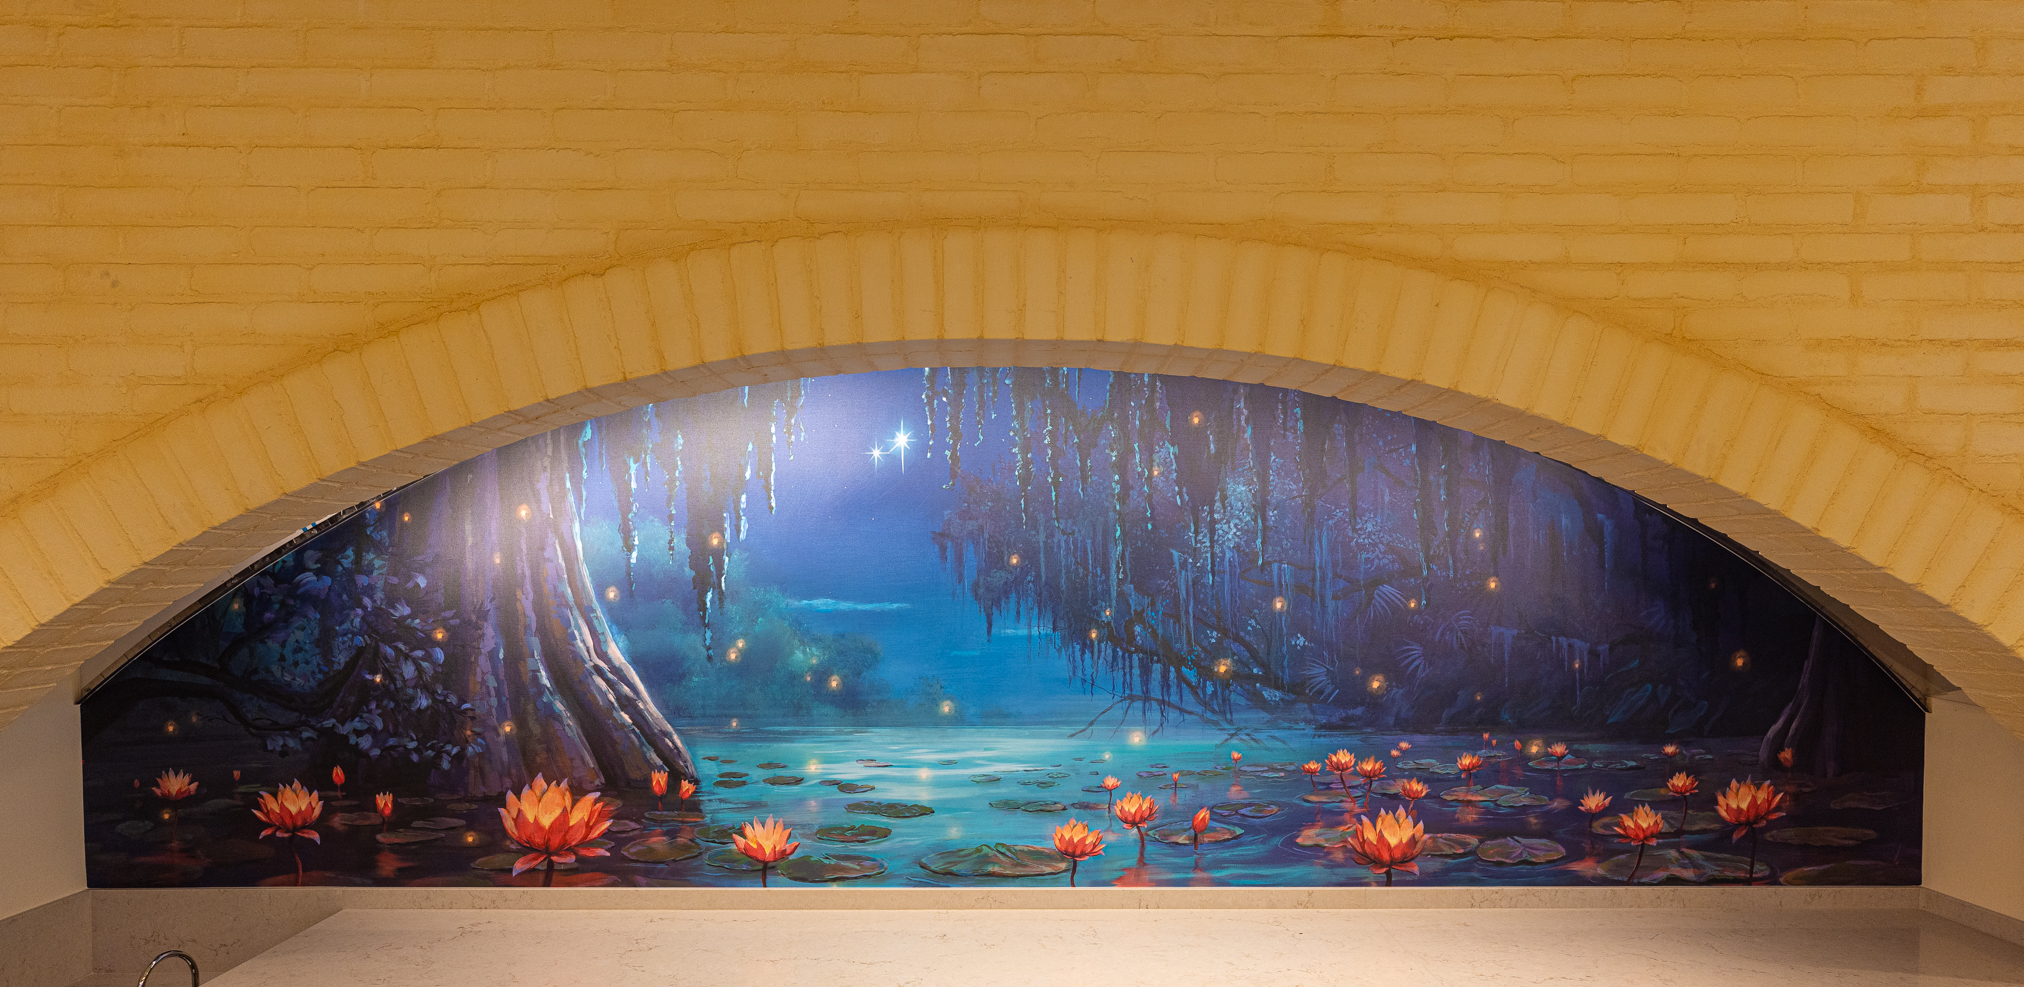 Guests will find a mural of the bayou inside of Tiana’s Palace, which will open in New Orleans Square at Disneyland Park in Anaheim, Calif., on Sept. 7, 2023. Inspired by the Walt Disney Animation Studios film “The Princess and the Frog,” the reimagined quick service restaurant will serve authentic New Orleans flavors inspired by Tiana’s friends and adventures. While Tiana’s Palace is not a character dining location, guests may find Tiana in New Orleans Square. (Christian Thompson/Disneyland Resort)